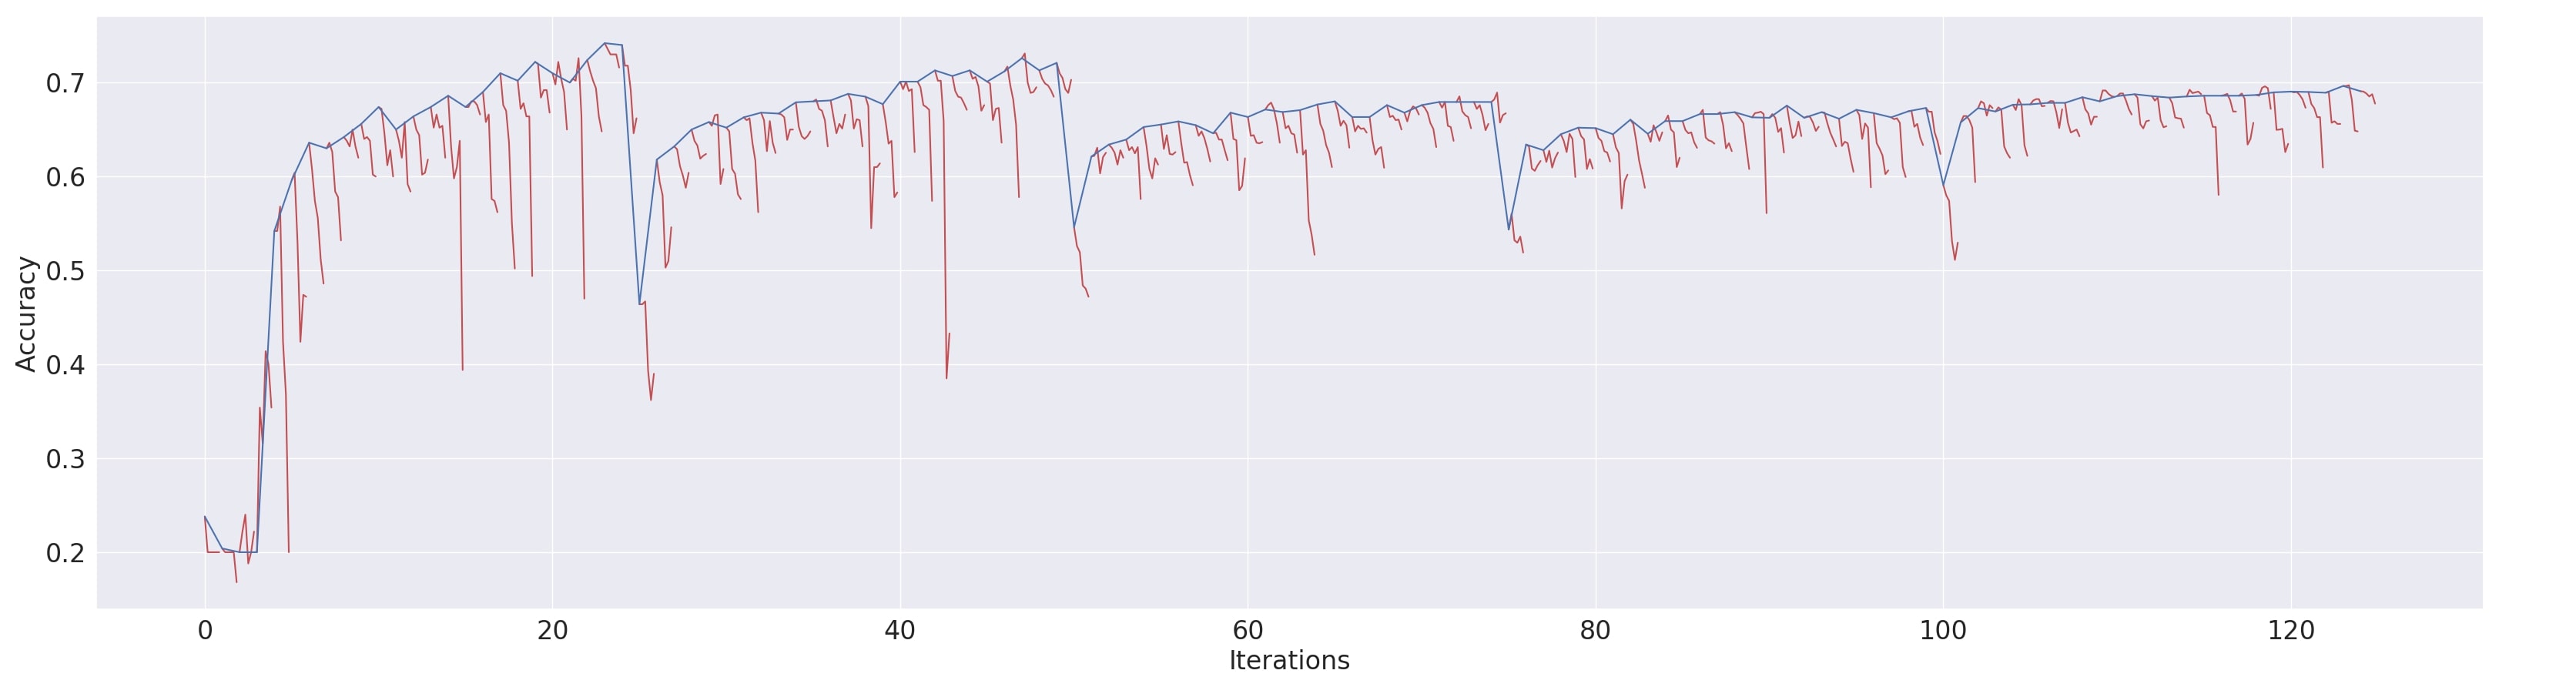 Figure 6. Retained Accuracy (RA) for La-MAML plotted every 25 meta-updates up to Task 5 on CIFAR-100